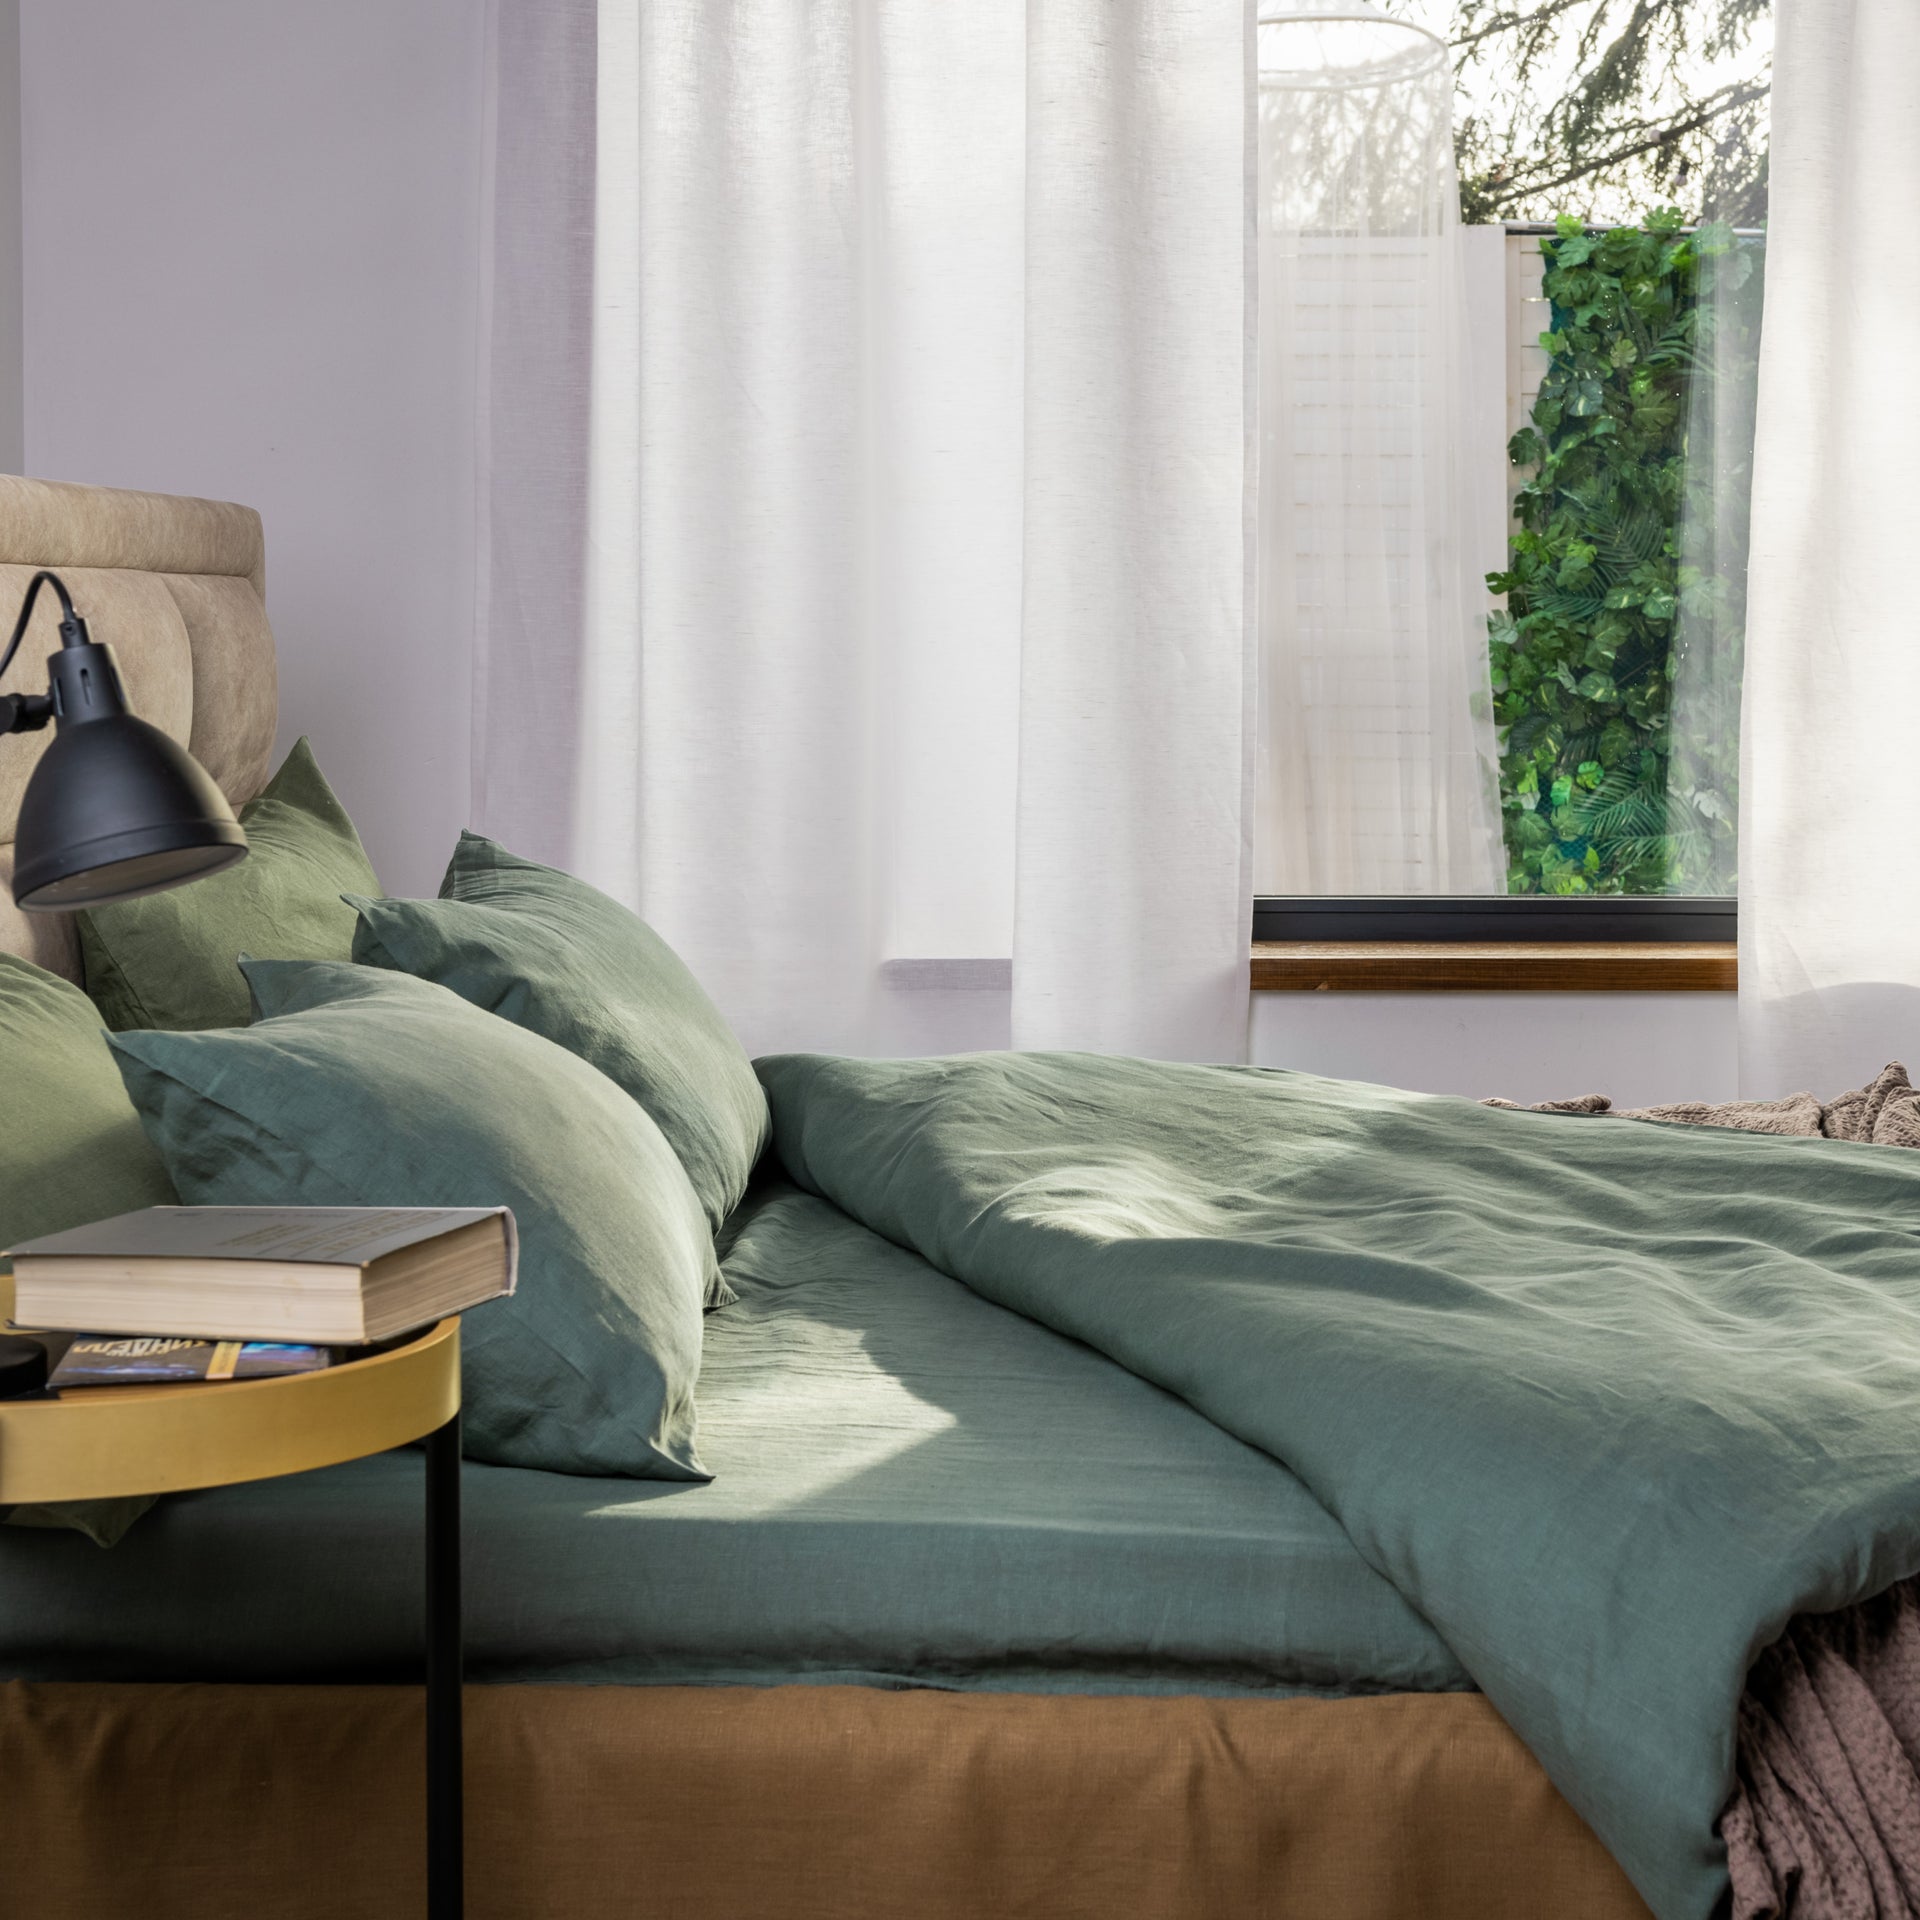 White bed linen with green cushions & bedhead  Green bedding bedroom, Bedroom  cushions, White linen bedding